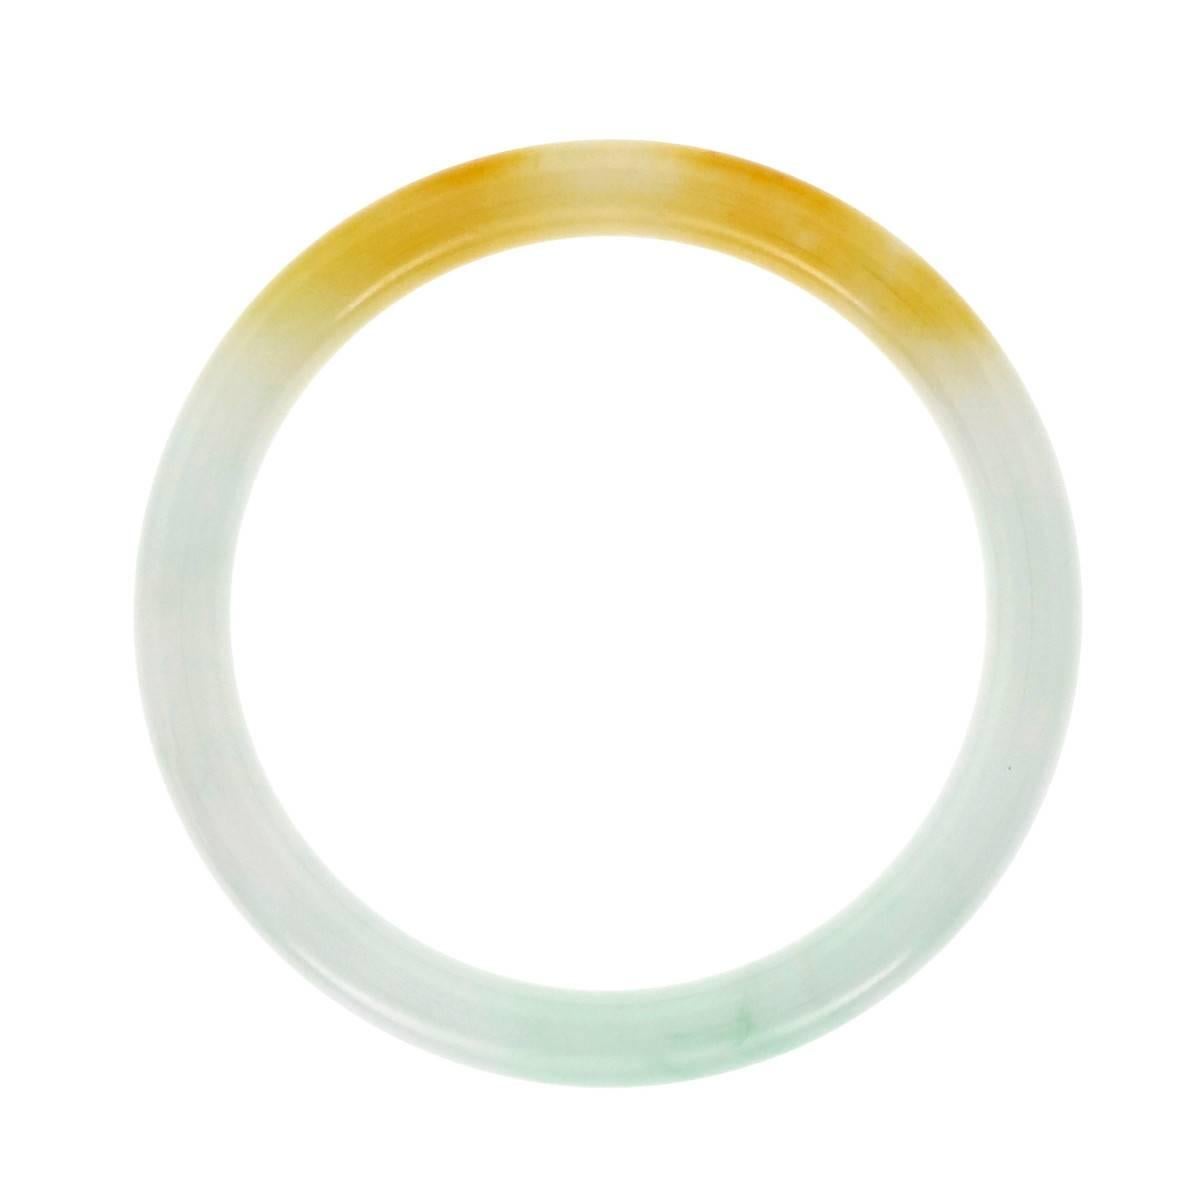 Natural Jadeite Jade blended white, brown and green color GIA certified undyed and untreated. Inside circumference 8.25 inches and will fit over most hands. Bright translucent Jade.

1 variegated light brown and green Jadeite Jade bangle bracelet,